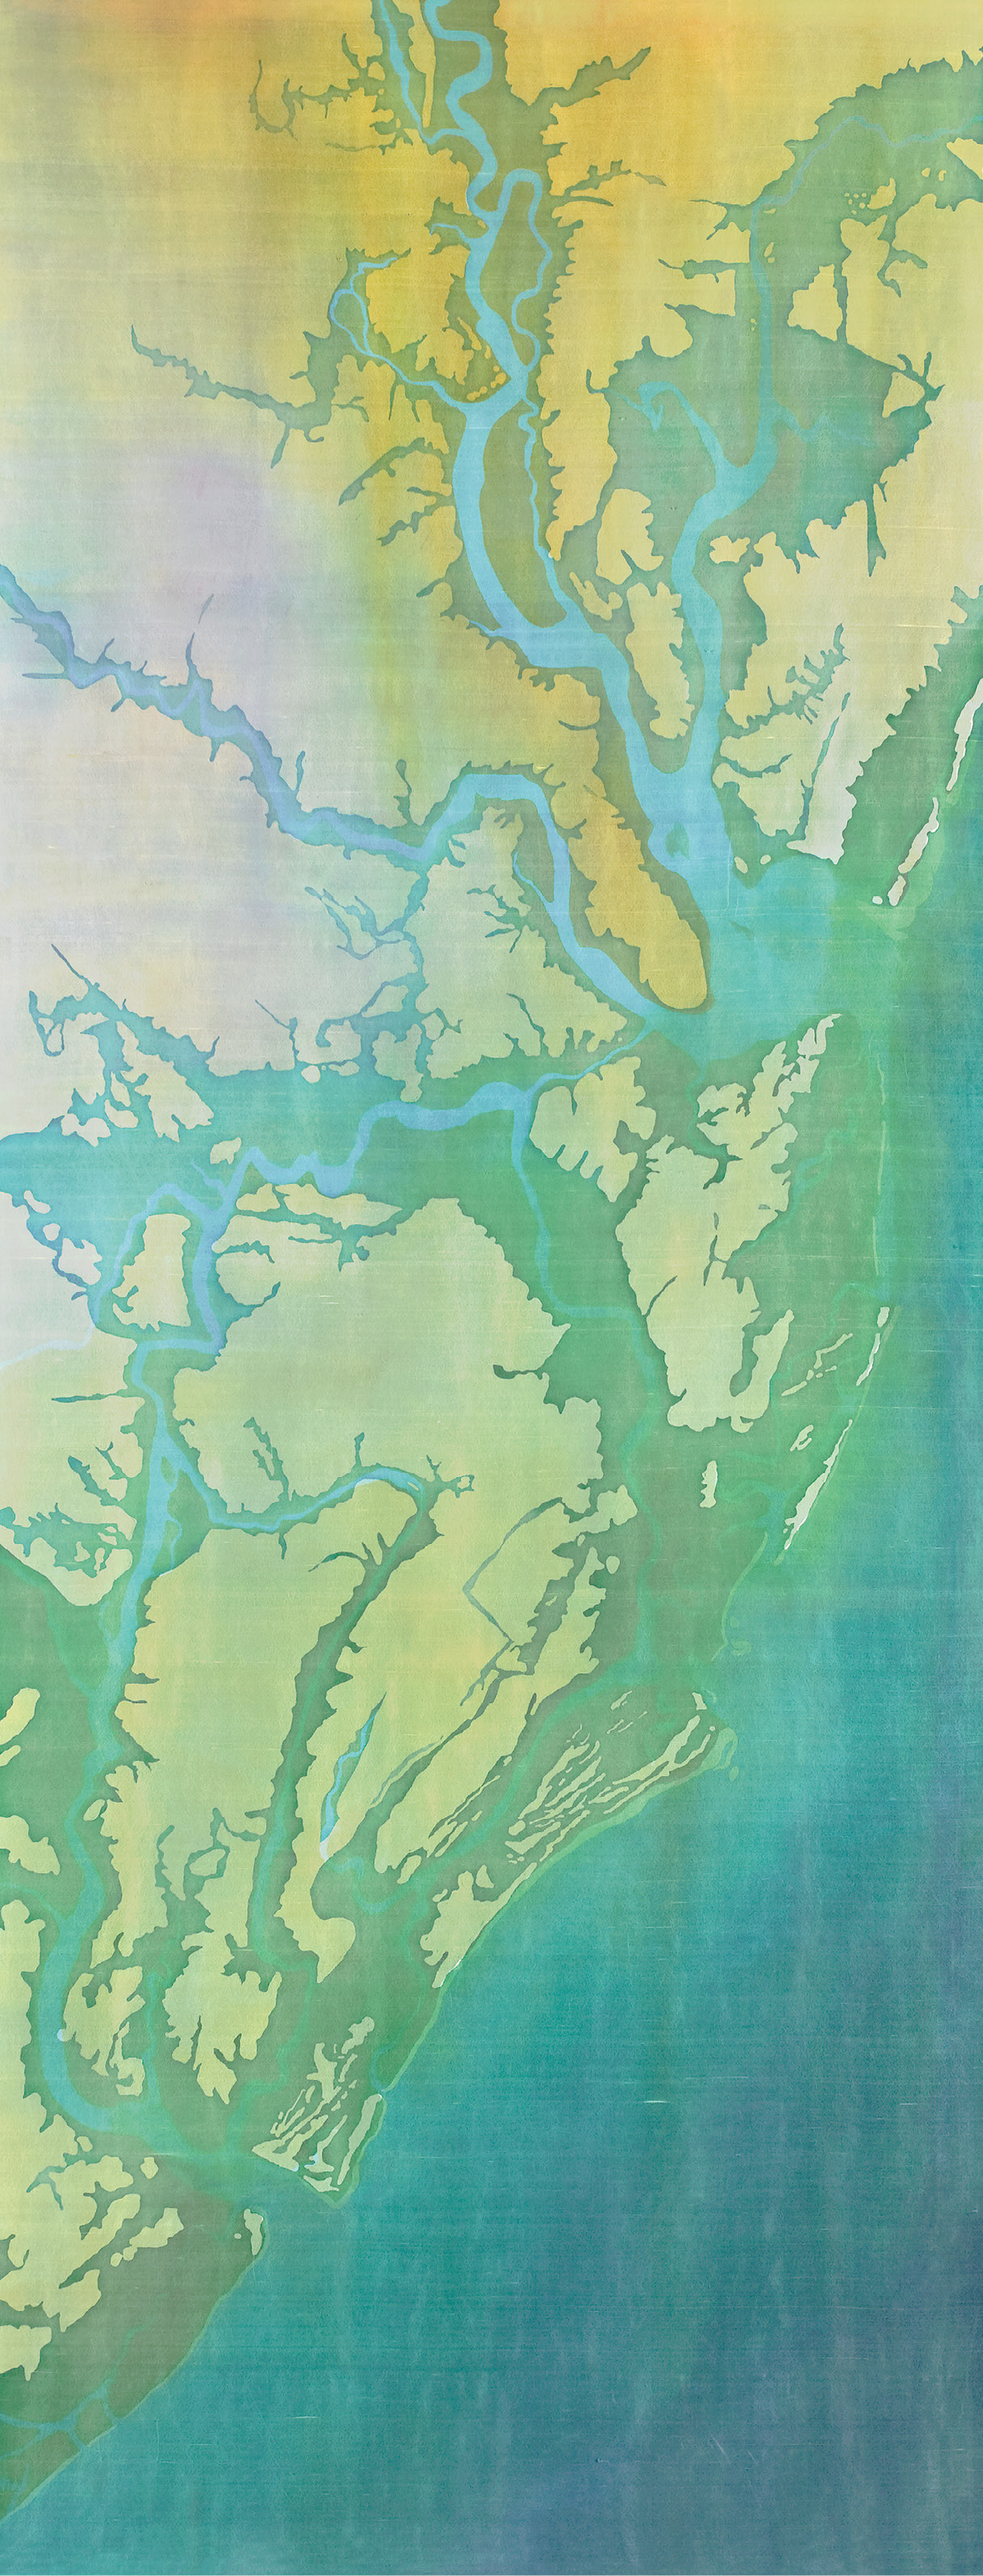 Nature Acts: Fraser’s batik, Charleston Airbourne Flooded (batik on silk, 97 x 35 inches, 2010) depicts NOAA’s projections of the Lowcountry’s 4.6-foot sea level rise by the year 2100. It will become a 98-foot centerpiece for “Awakening V” as it hangs on the Joseph Floyd Manor with the added words, “We argue. Nature acts.”—a play off Voltaire; image courtesy of Mary Edna Fraser